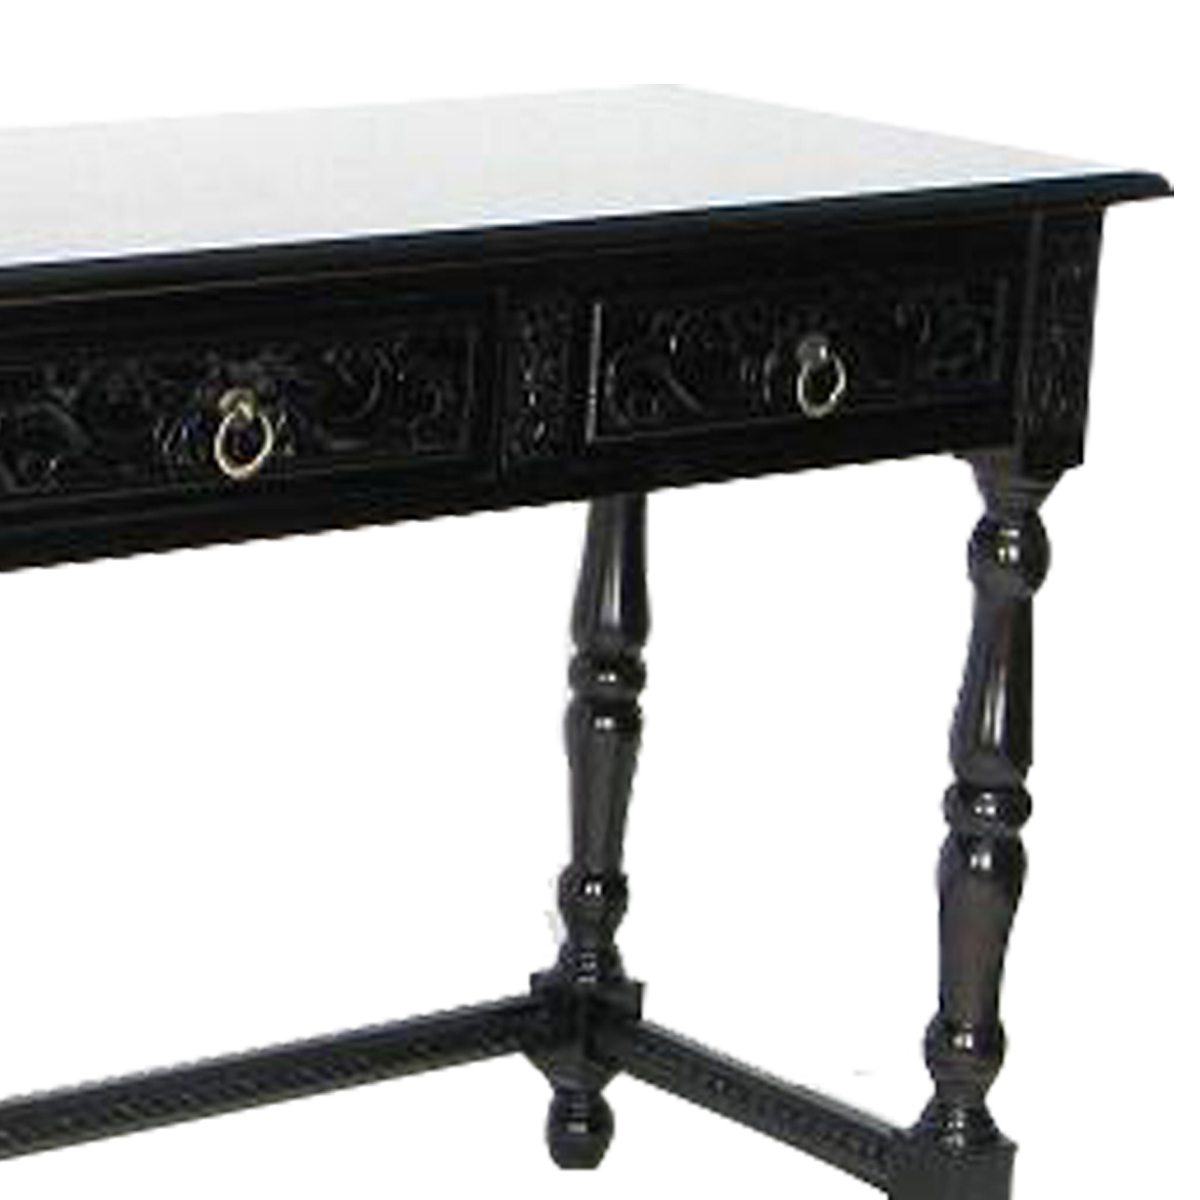 Wooden Console Table With Carved Details And Turned Legs, Black- Saltoro Sherpi